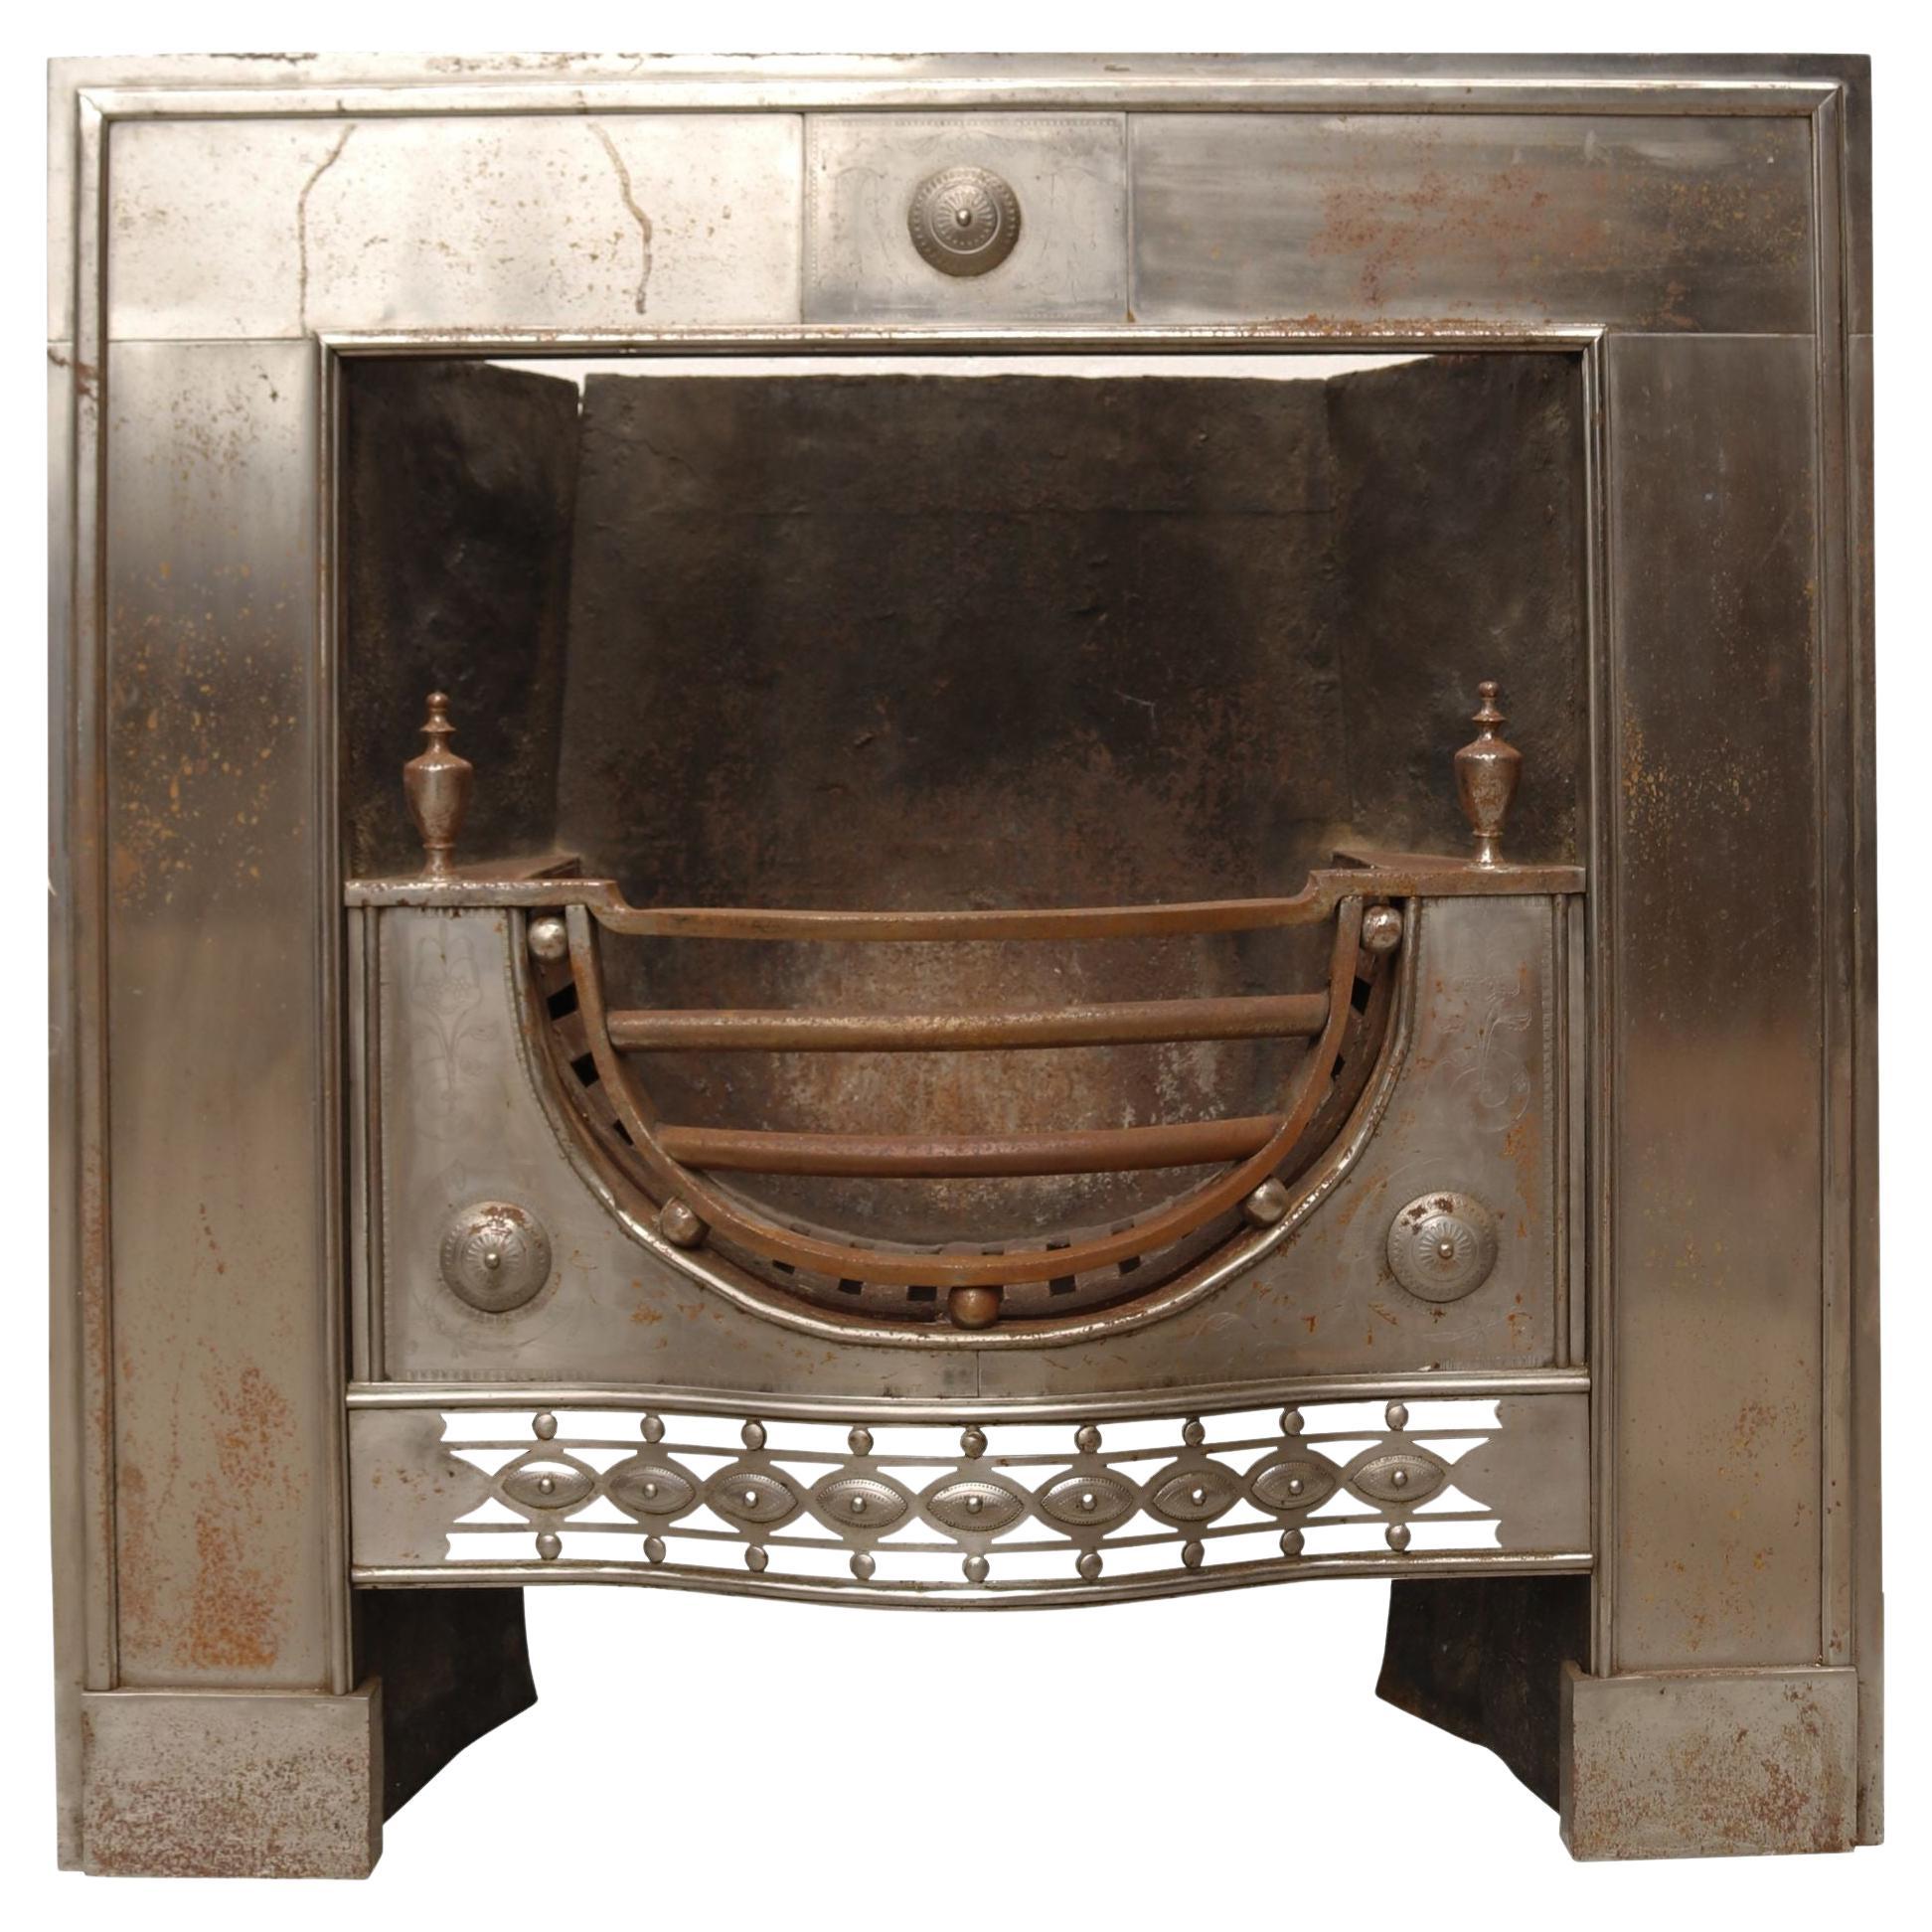 English 18th Century Style Register Fire Grate For Sale